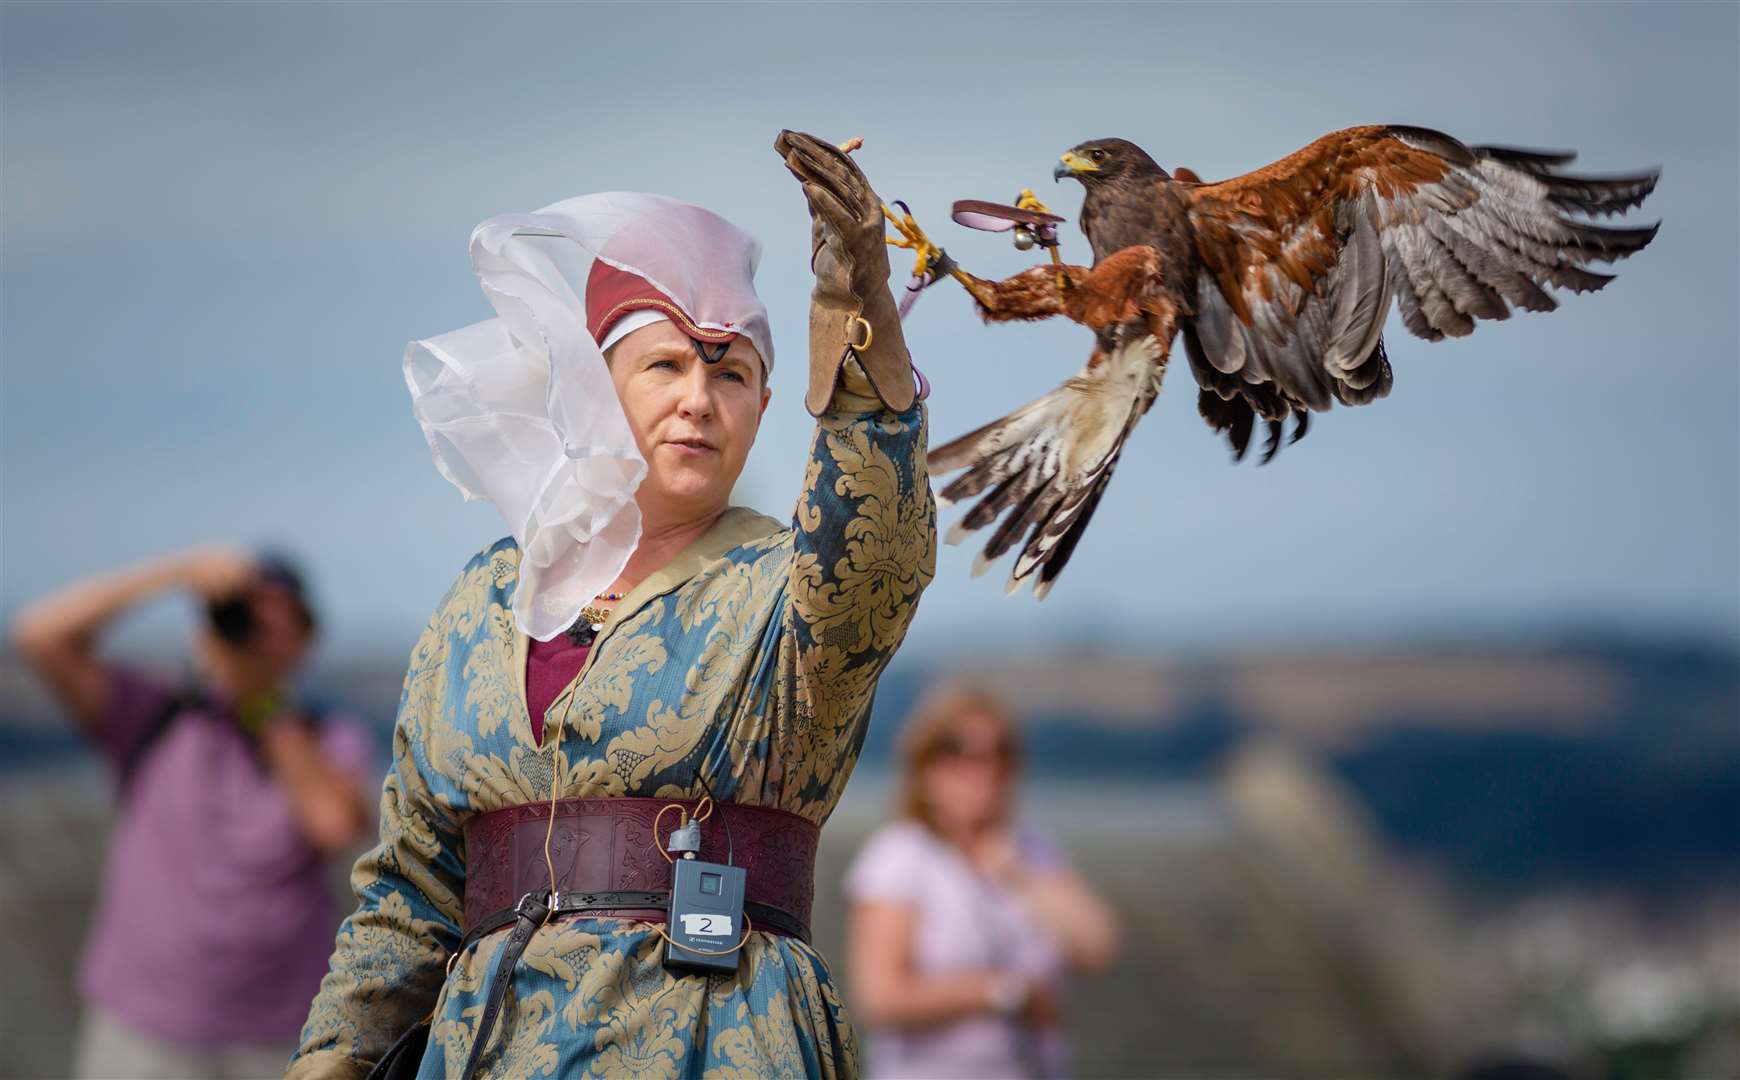 Birds of prey will take flight at Dover Castle this weekend